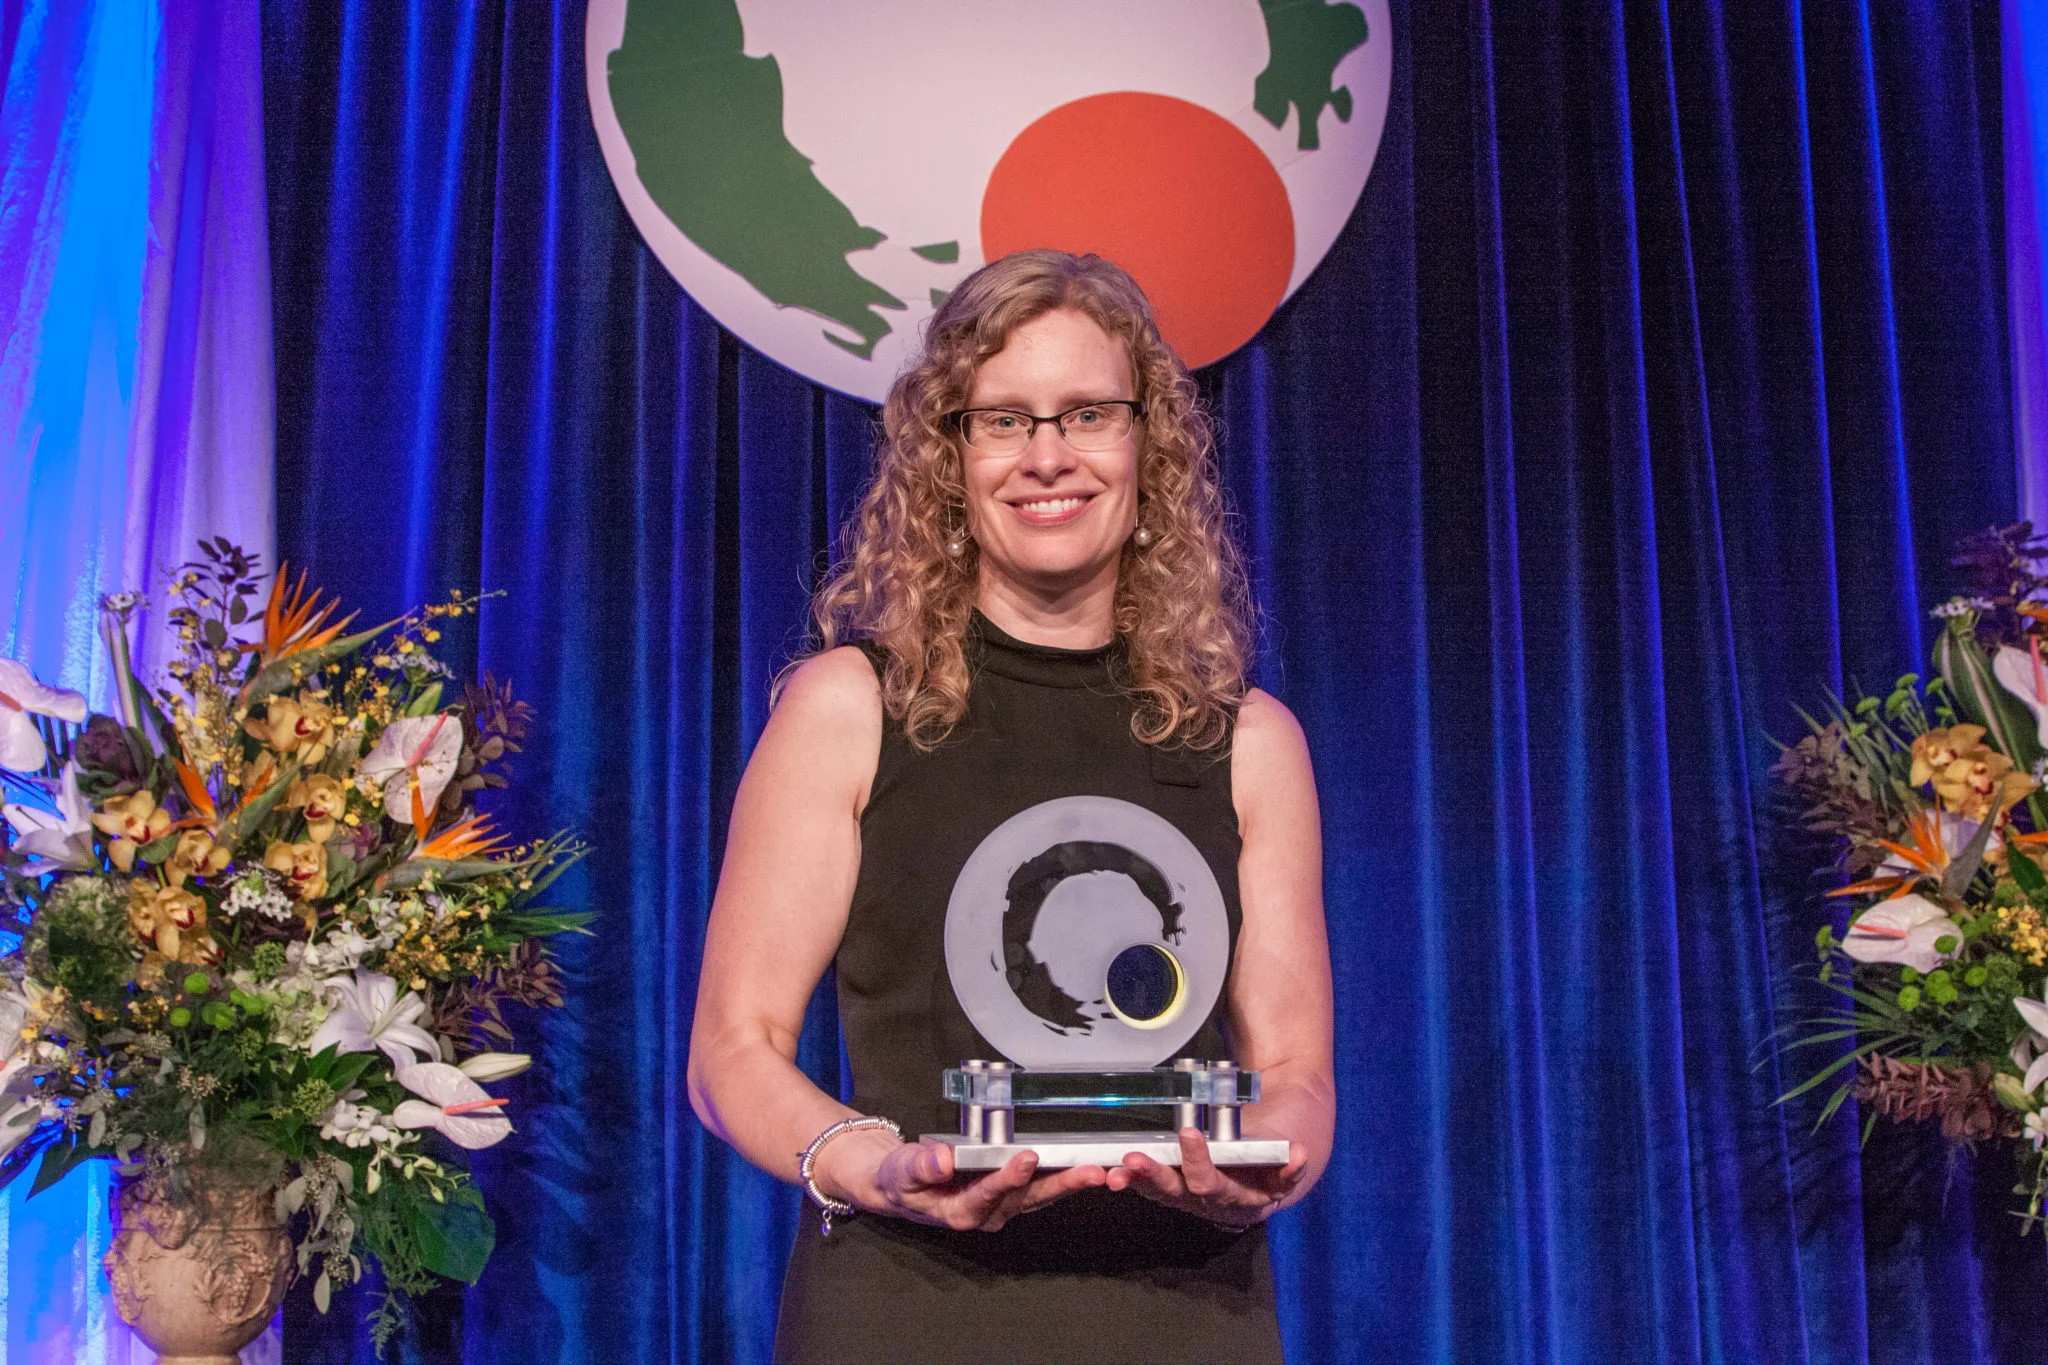 Dr. Heather Boon, 2015 Dr. Rogers Prize winner